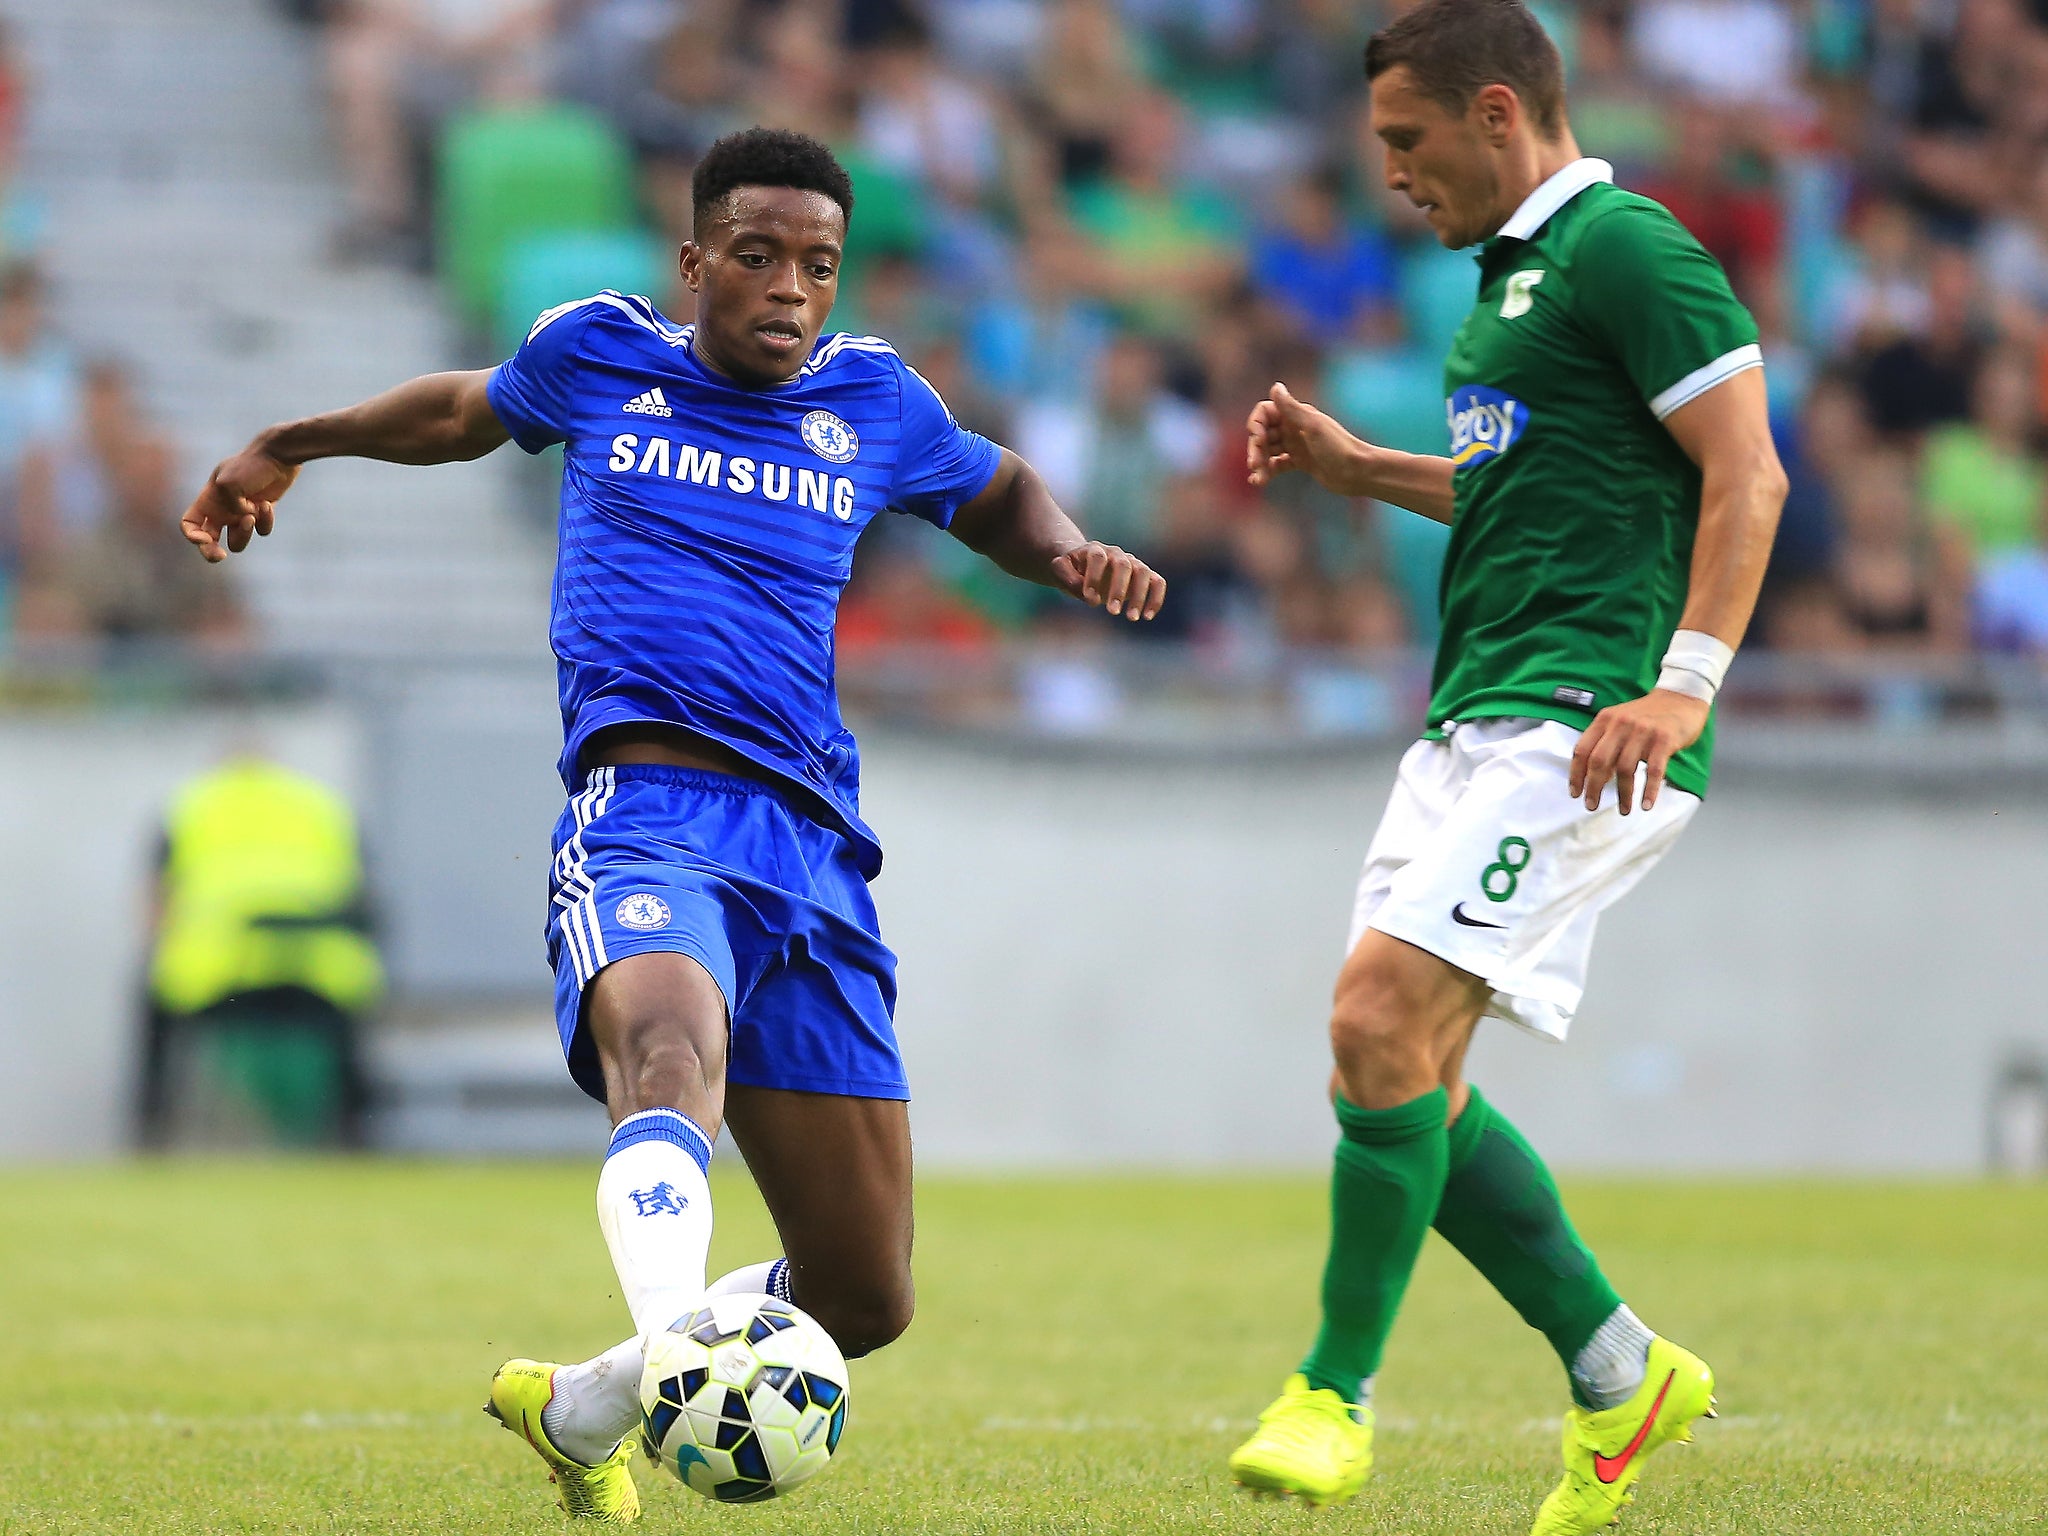 Chalobah has been at Chelsea 10 years but is yet to play a competitive game for the senior side